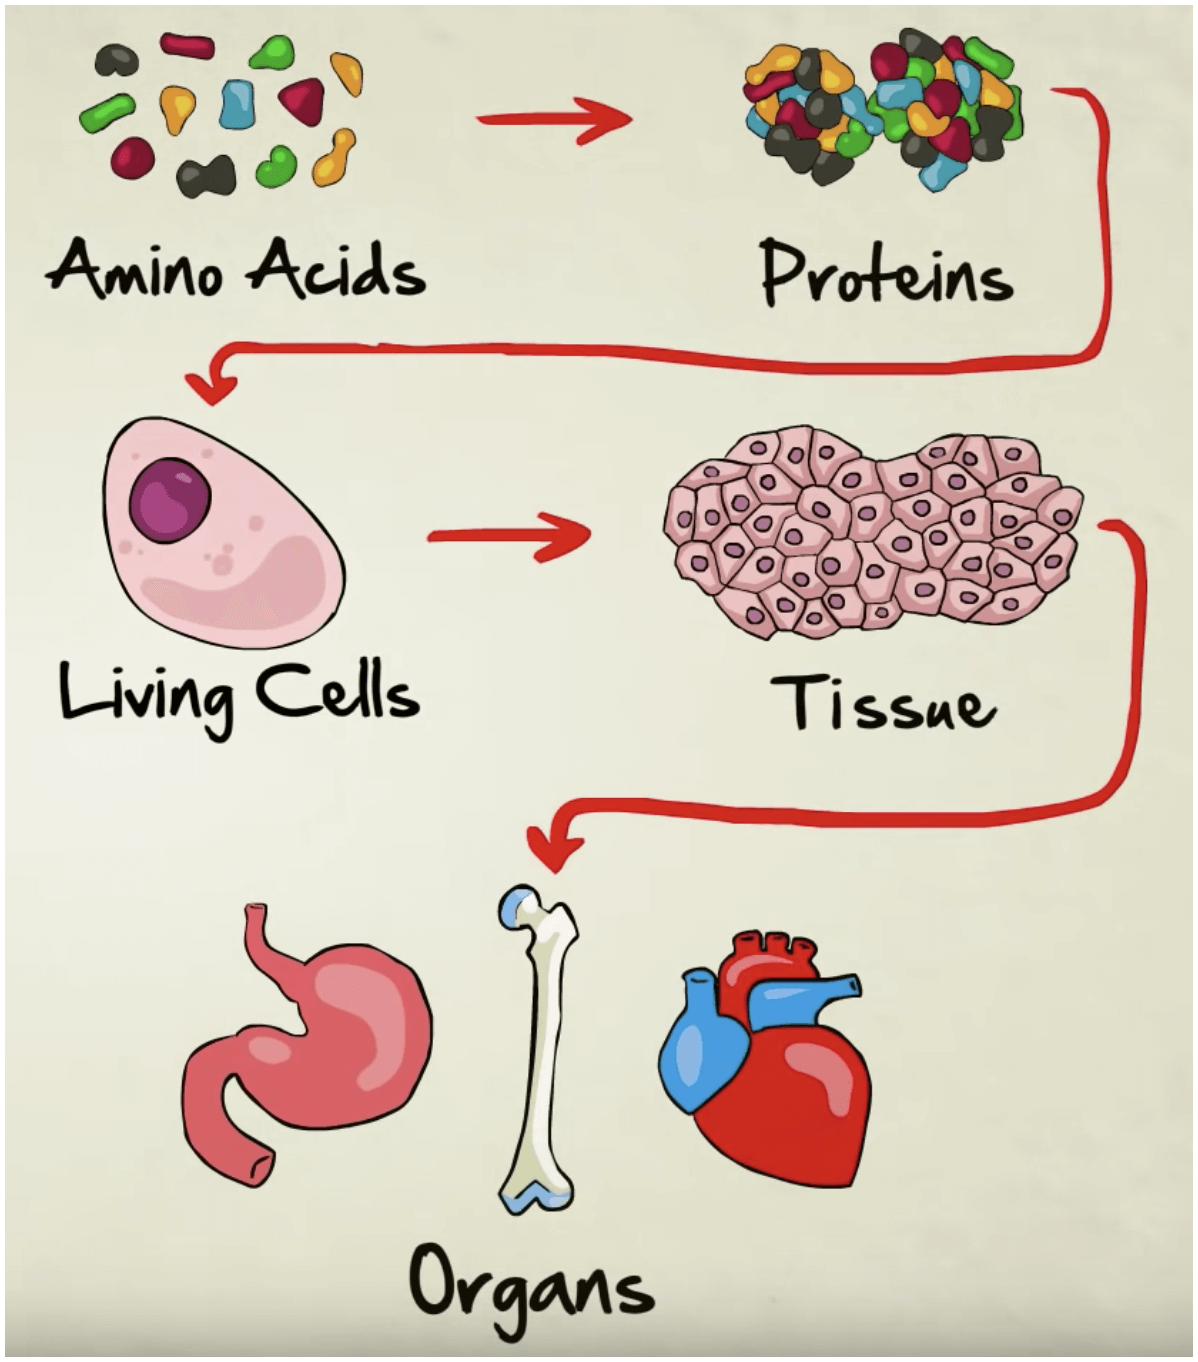 Amino acids to protein to cells to tissues to organs